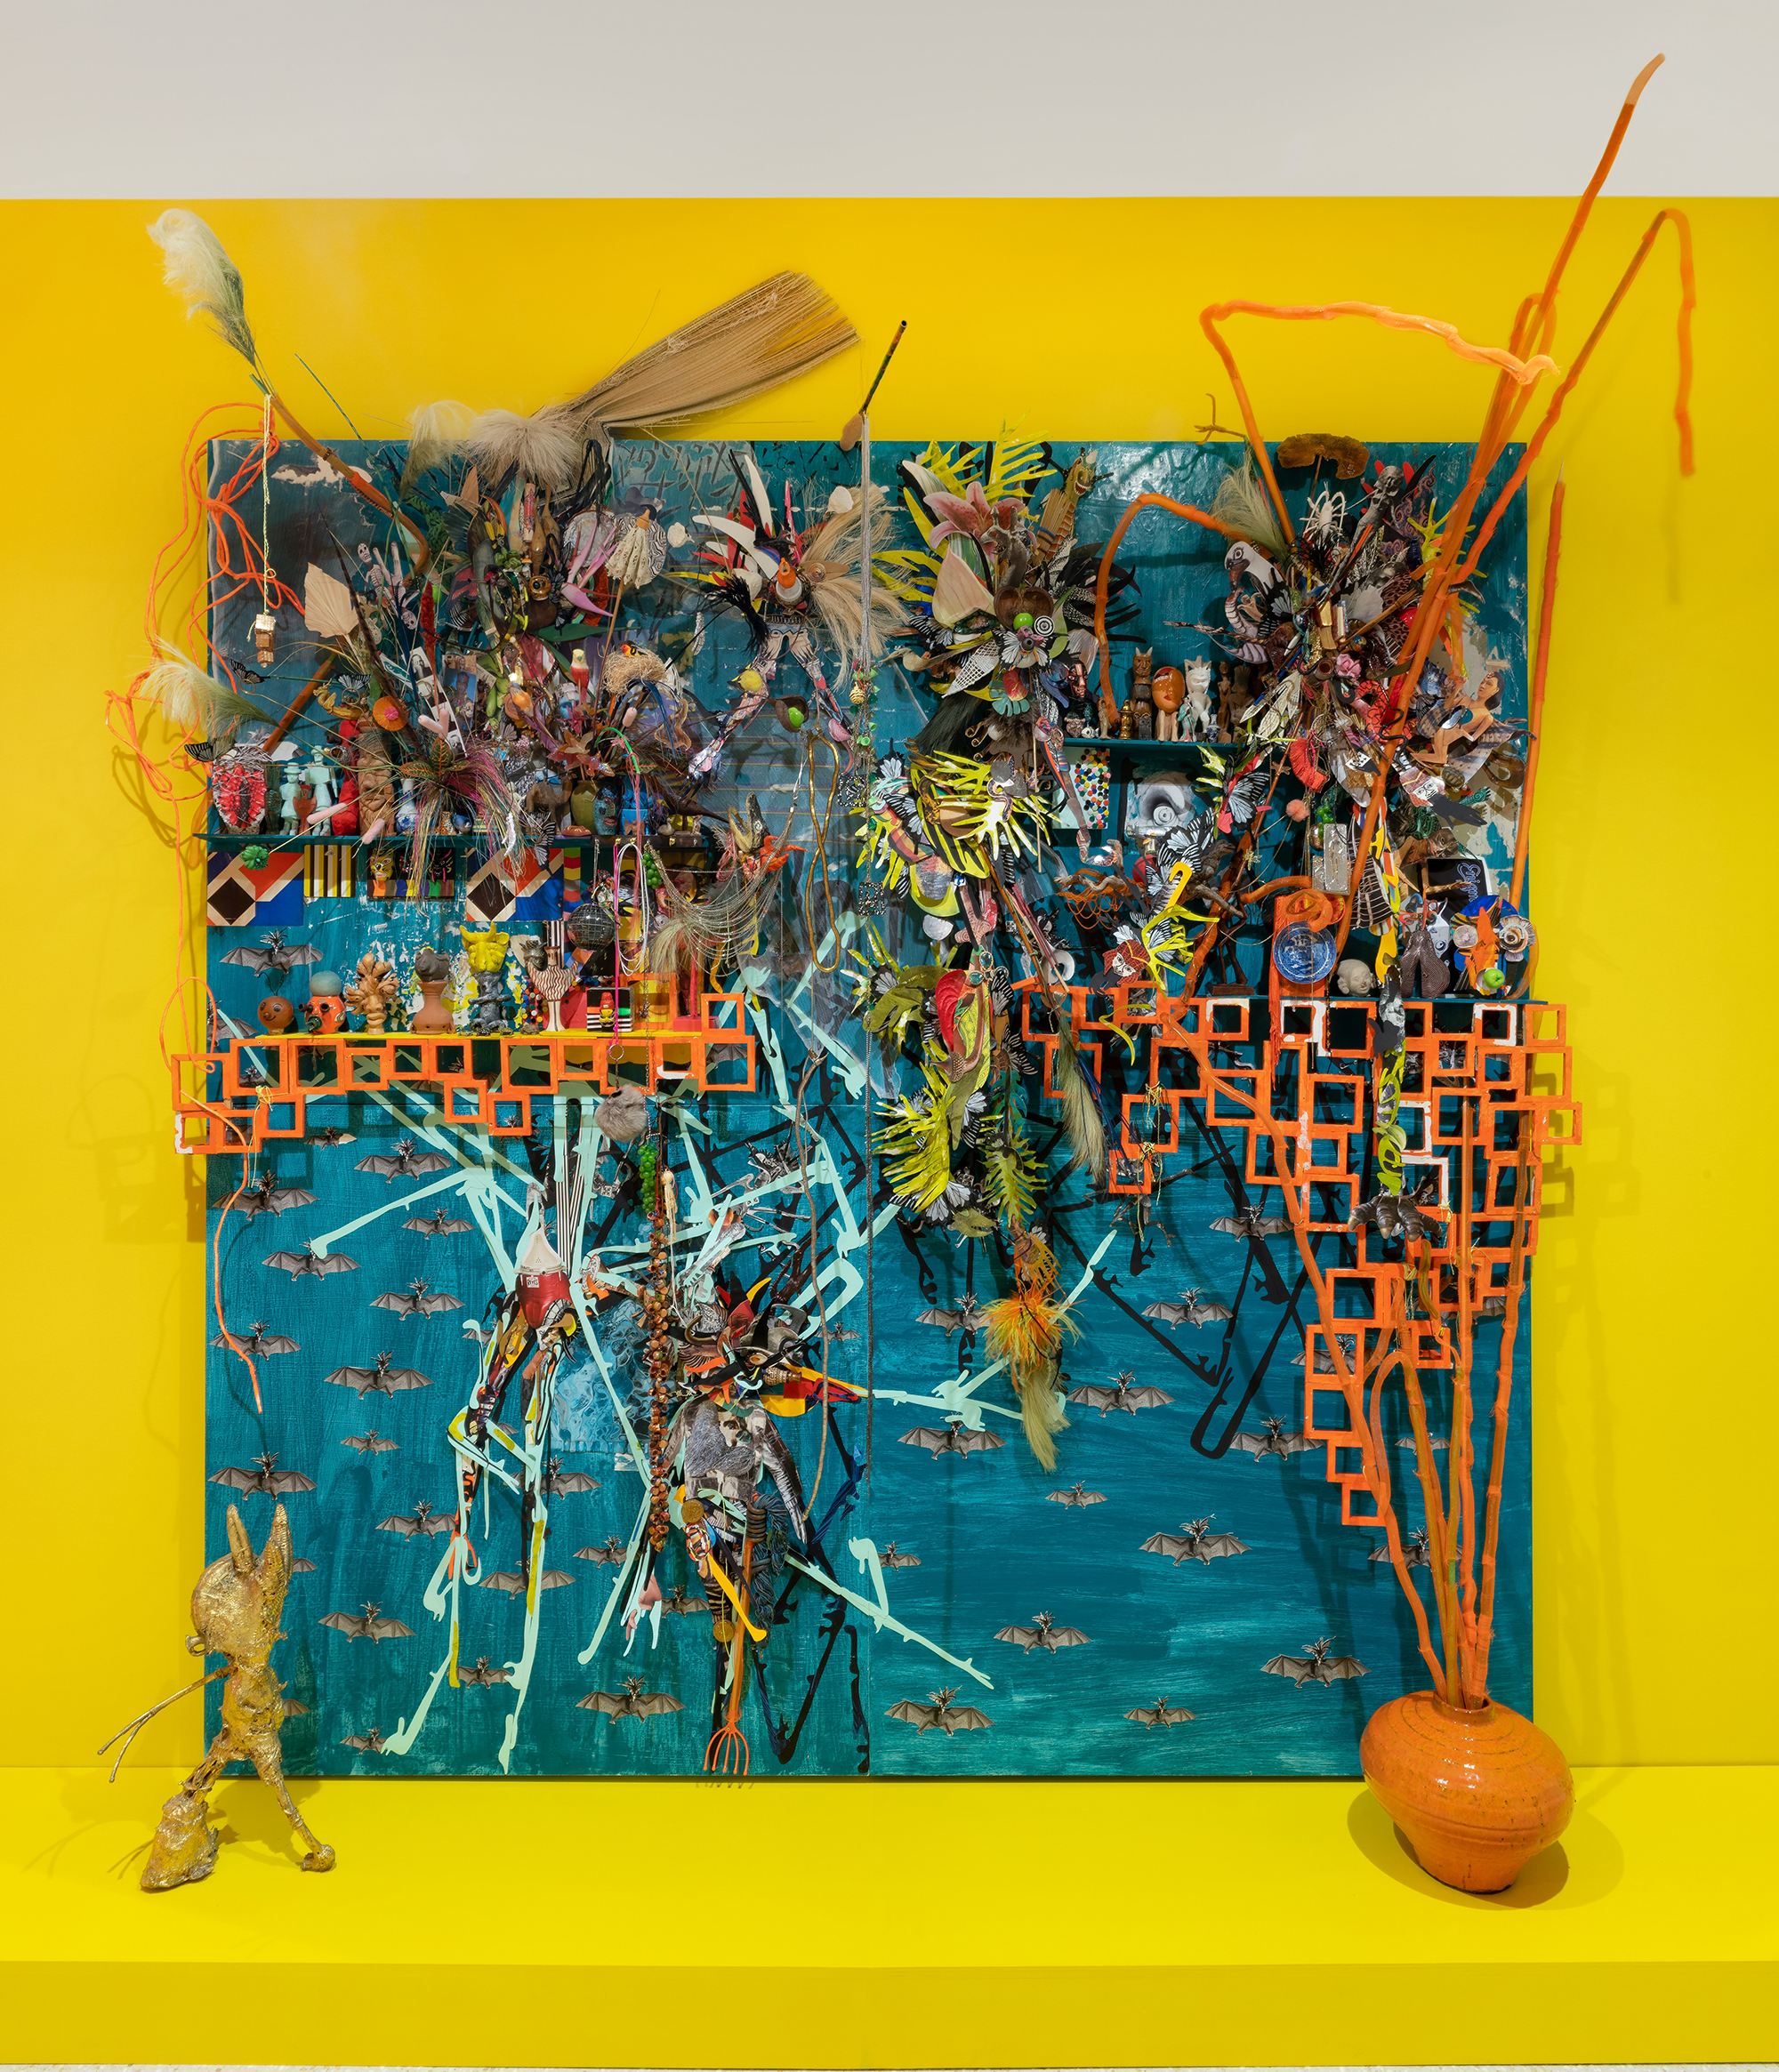 An abstract, collaged work resting on a yellow-painted plinth against a wall of the same color. The work has a blue background covered with flying bats, with collaged elements on top. A golden semifigural sculpture and an orange vase are on the plinth.